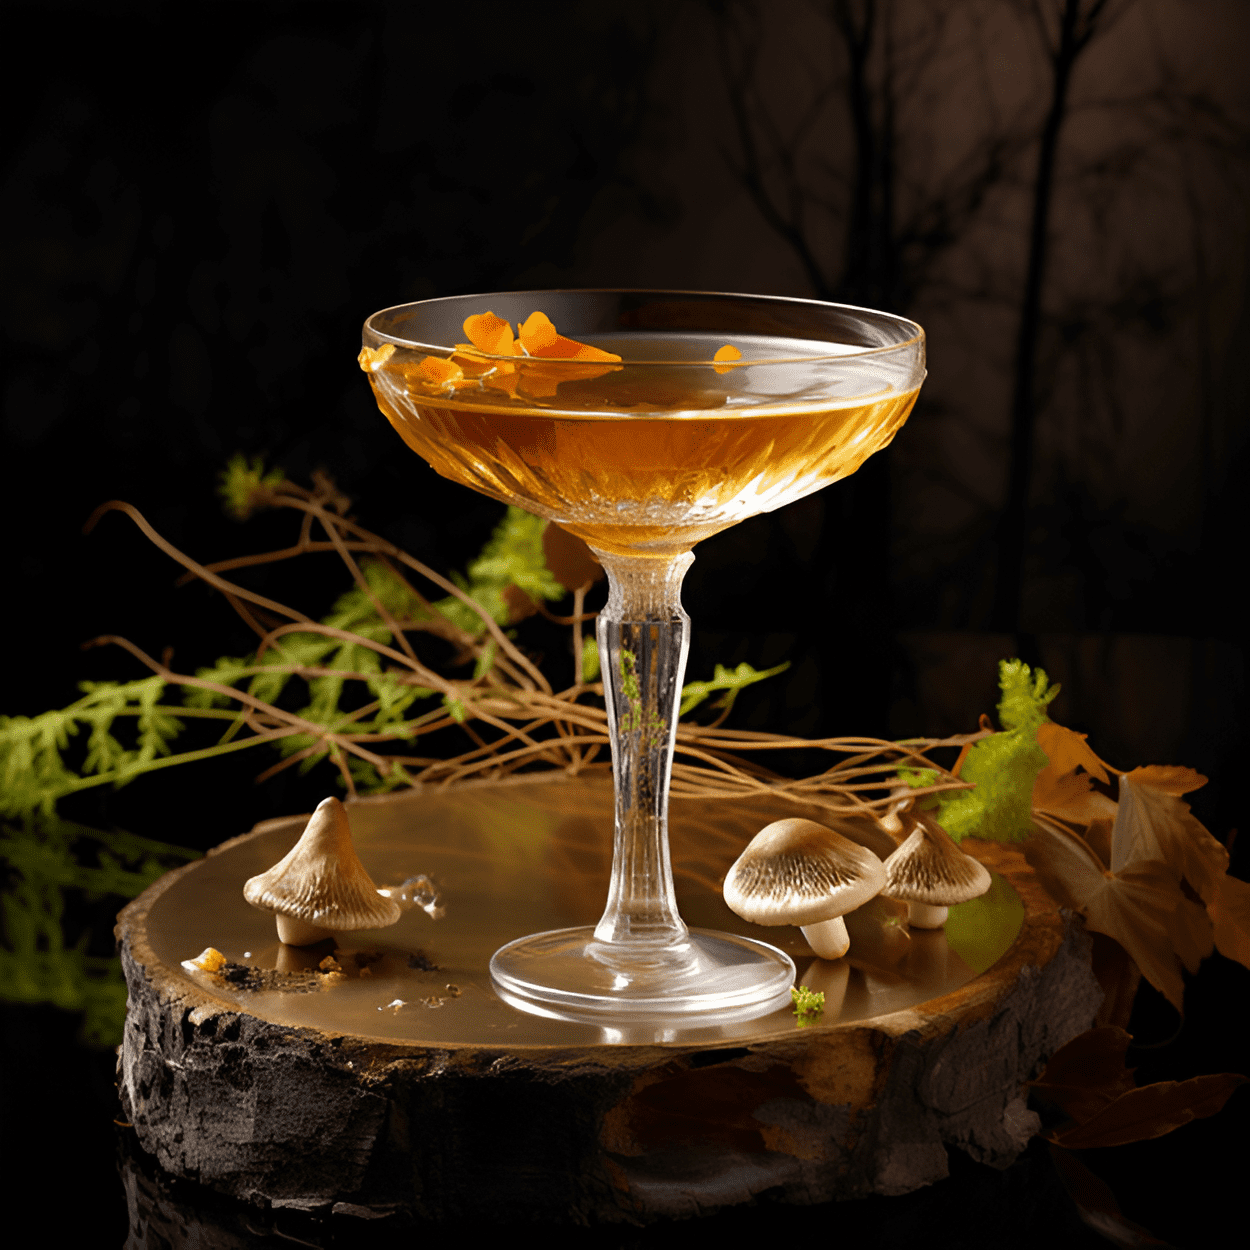 Forest Fungi Delight Cocktail Recipe - The Forest Fungi Delight is a complex cocktail with a rich, earthy flavor. The mushrooms lend a savory note that is balanced by the sweetness of the honey. The vodka adds a clean, crisp finish. It's a bold, robust cocktail that is sure to intrigue your palate.